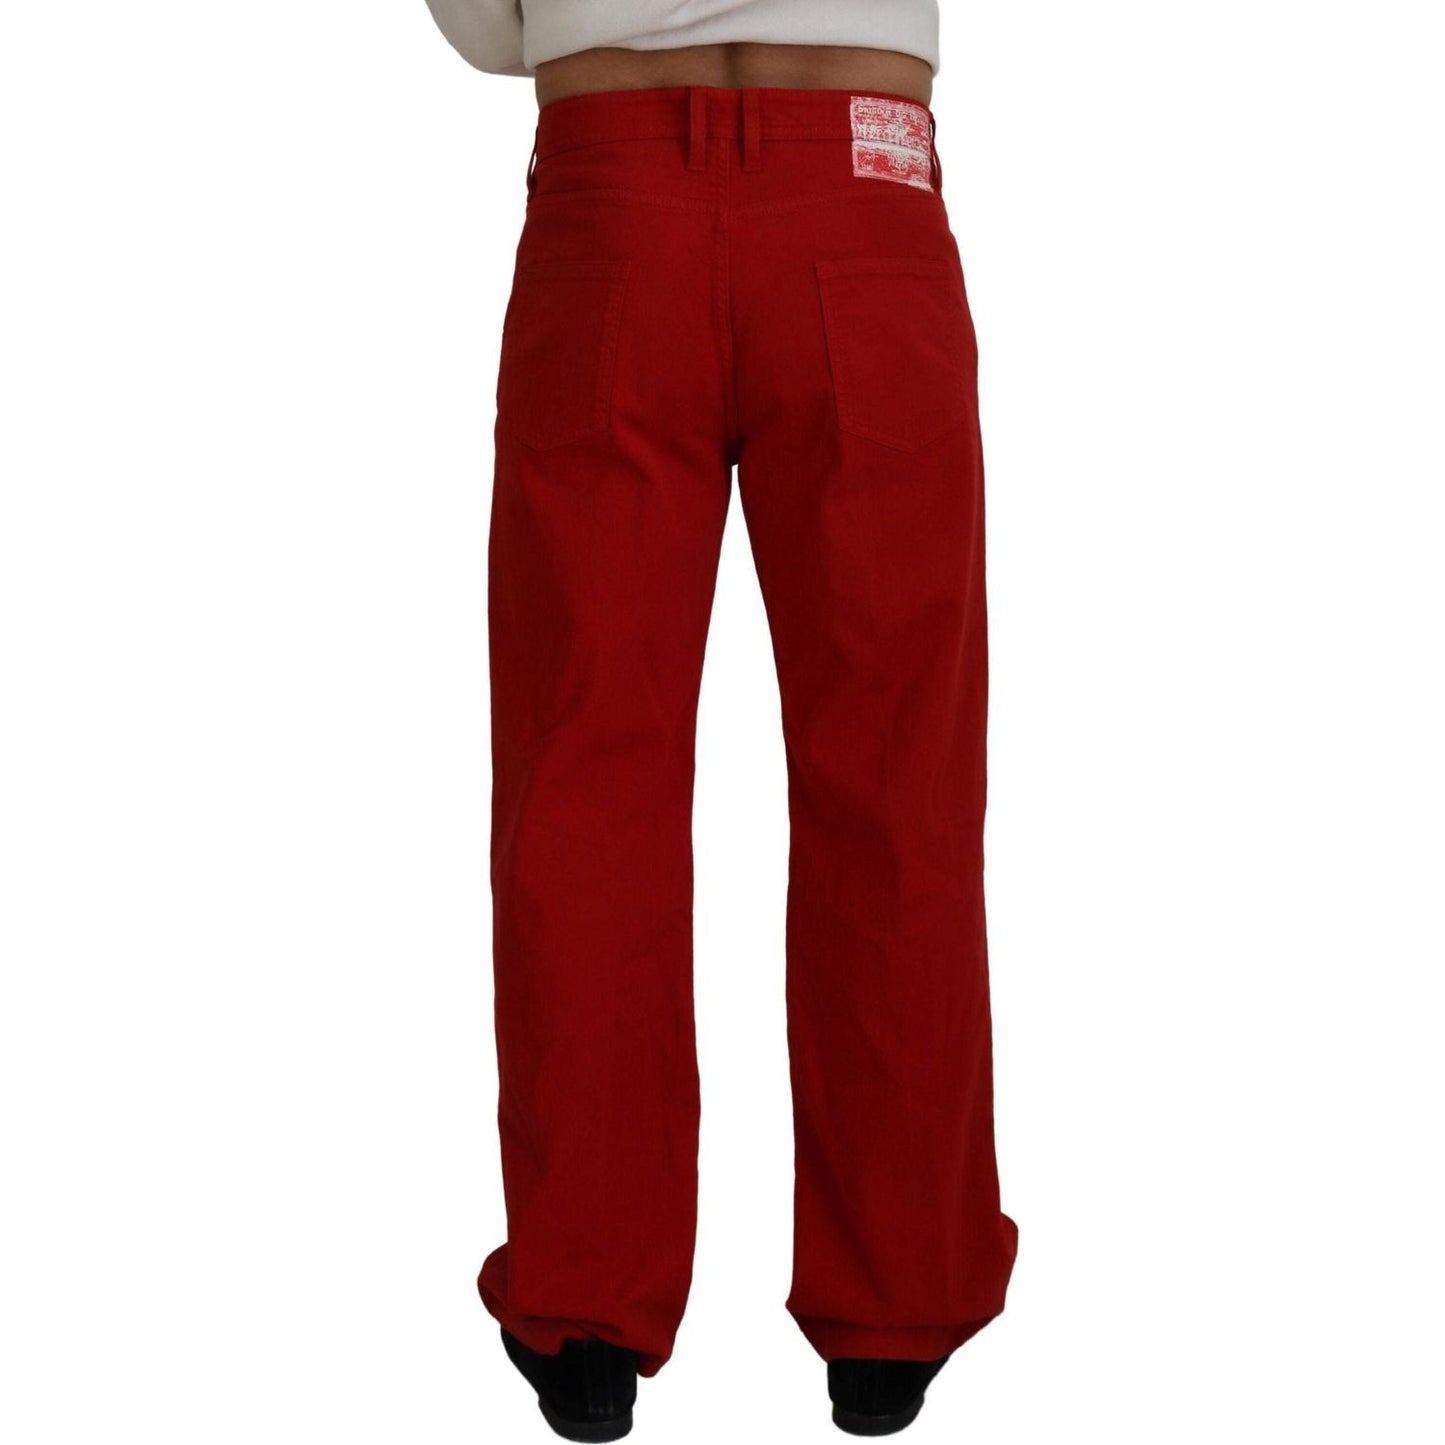 Dolce & Gabbana Chic Red Cotton Denim Pants red-cotton-straight-fit-men-denim-jeans IMG_7854-scaled-f018c929-5dc.jpg